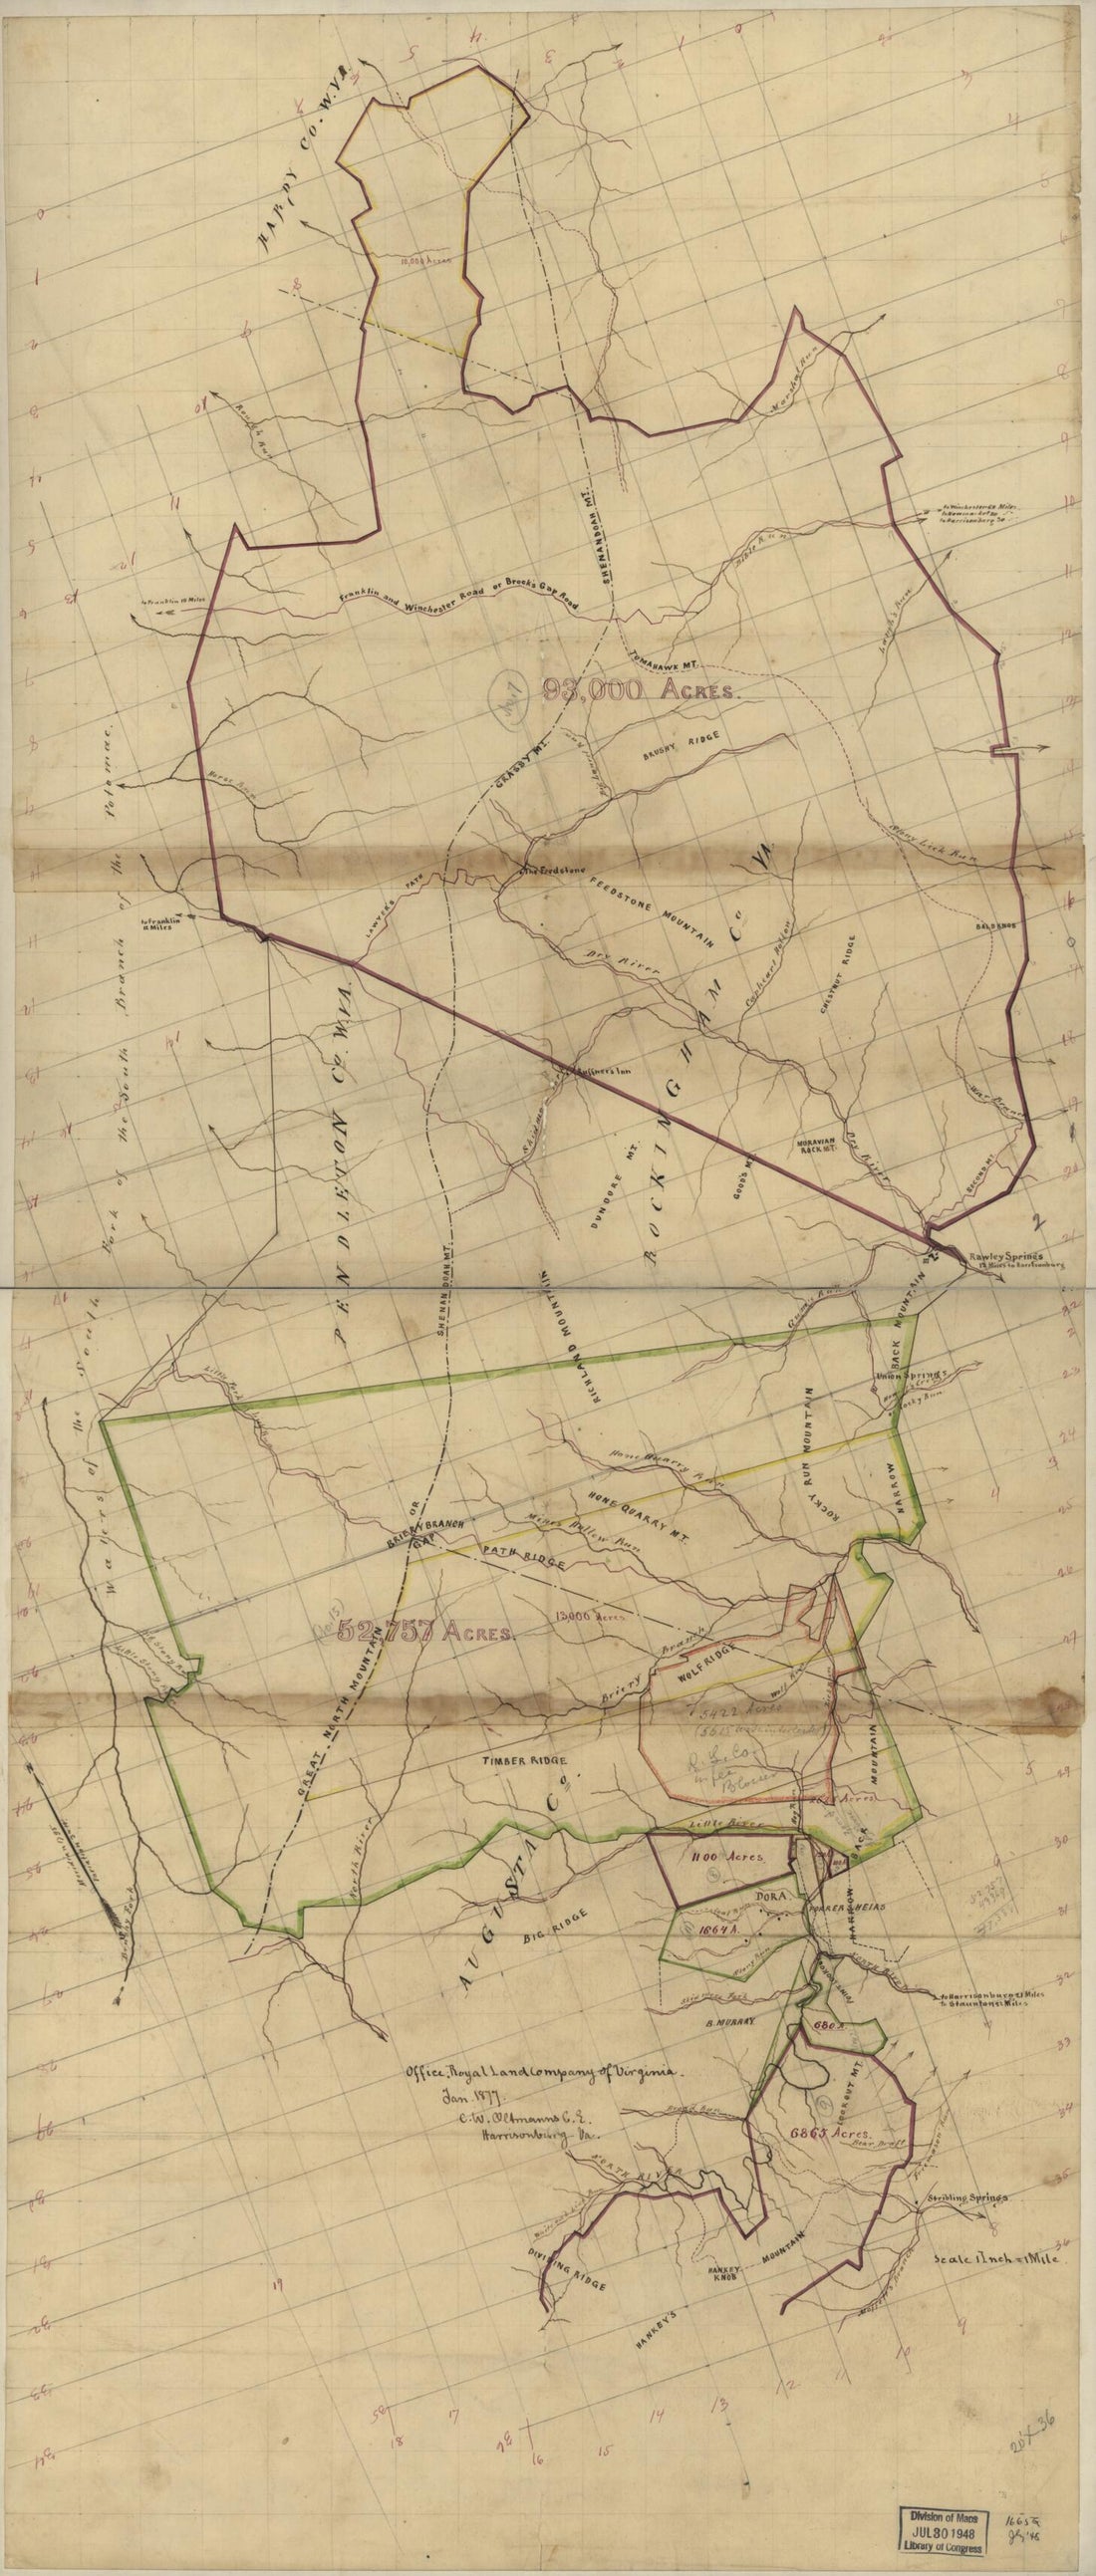 This old map of Map of Royal Land Company of Virginia Lands In Rockingham, and Augusta Counties Virginia, and Pendleton County, West Virginia from 1877 was created by C. W. Oltmanns,  Royal Land Company in 1877